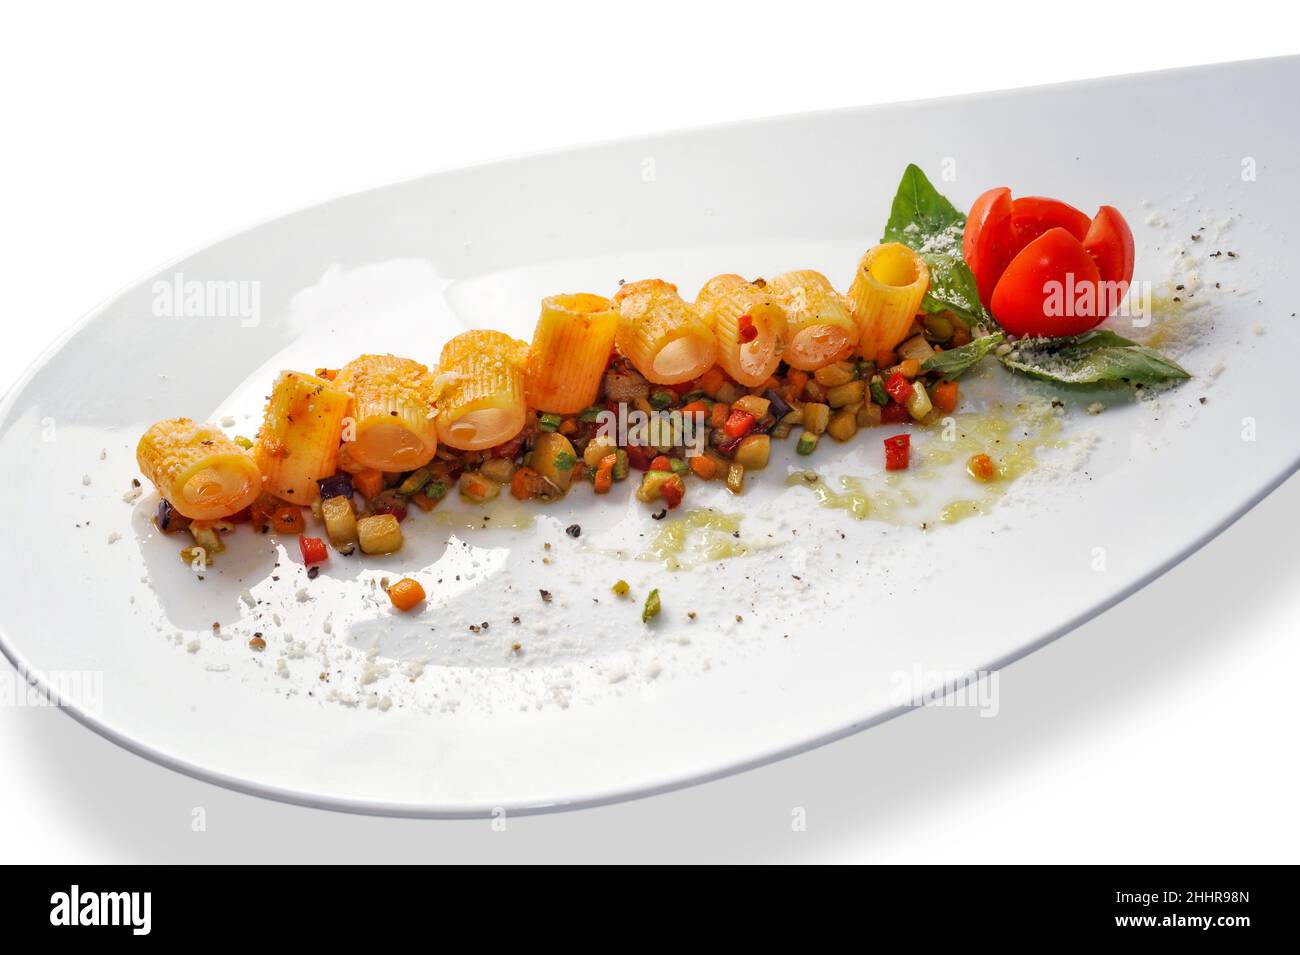 Mezze maniche pasta with tomato sauce on cooked cut vegetables with cherry tomato and basil leaves in white plate isolated on white background, copy s Stock Photo